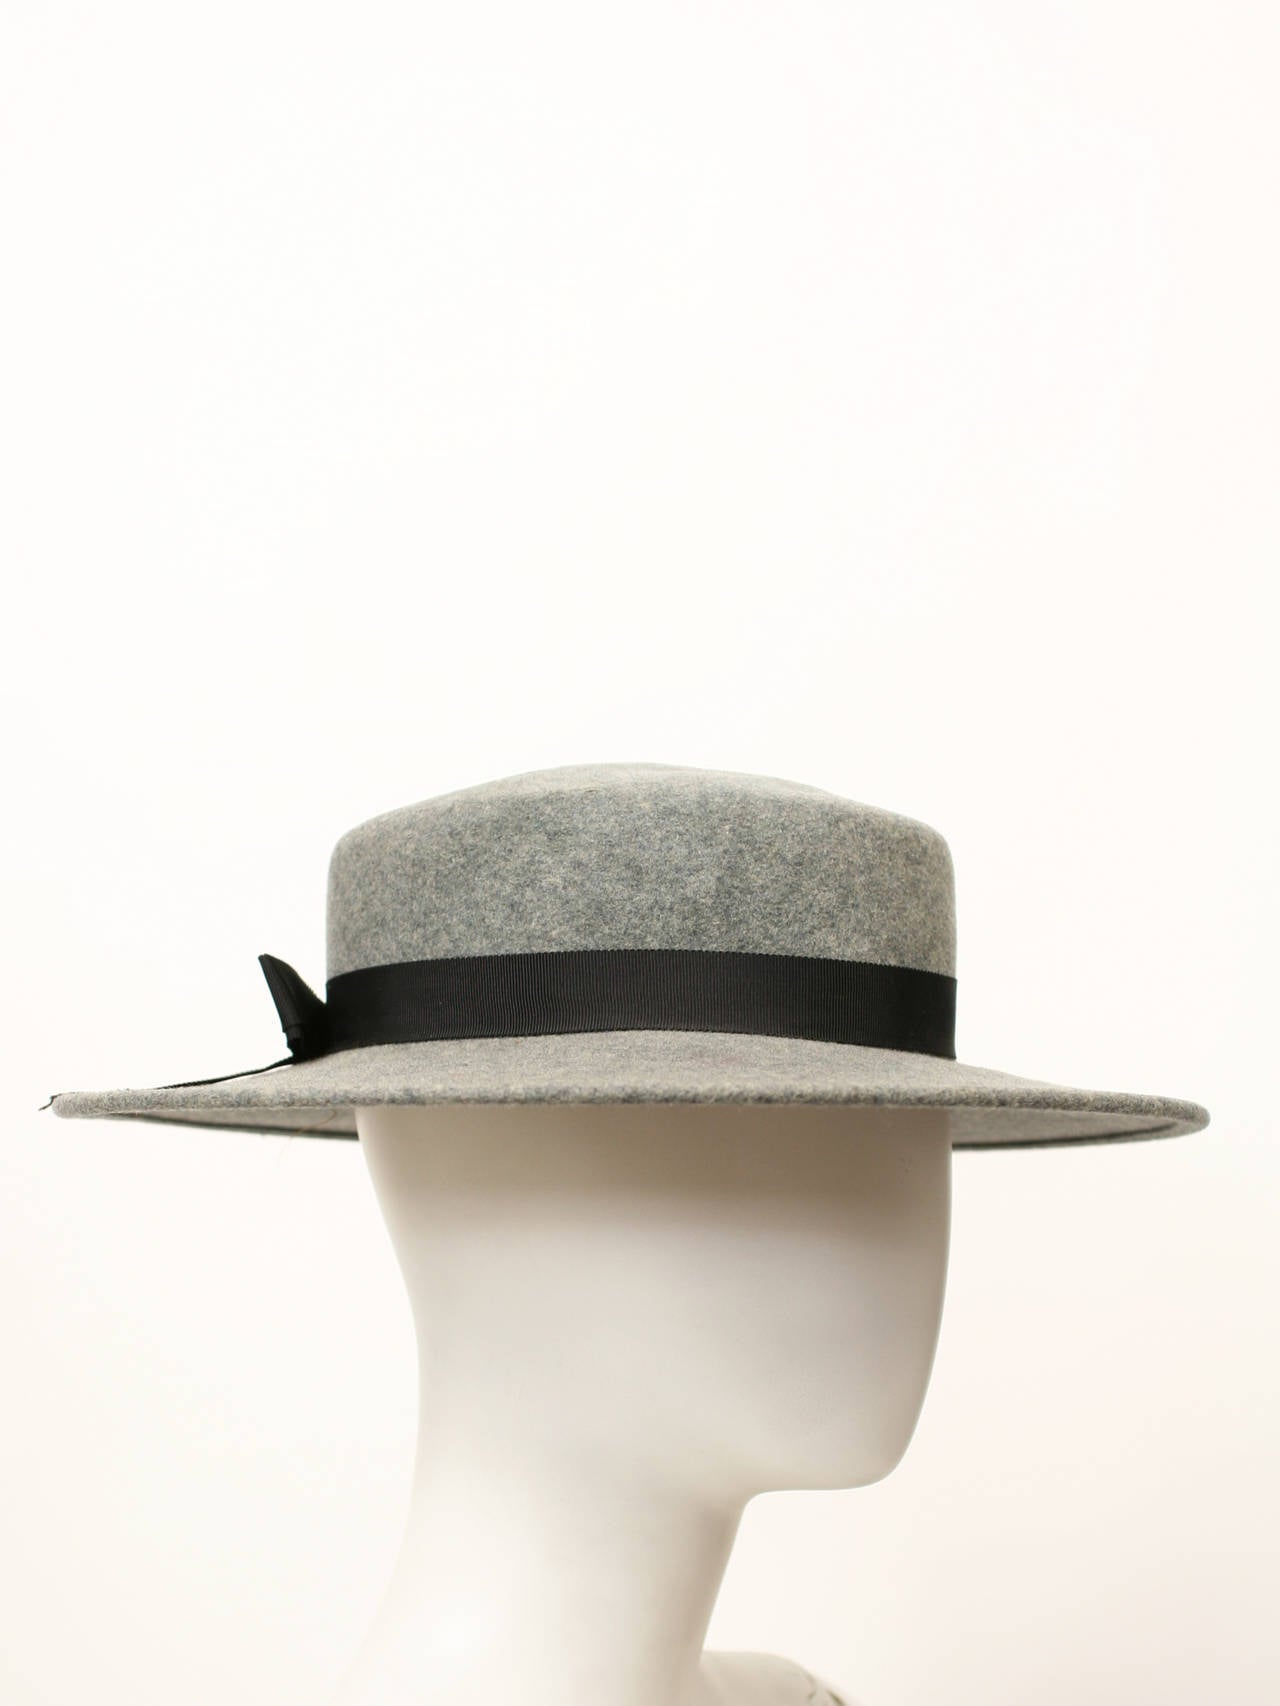 Yves Saint Laurent Grey Wool Wide Brim Hat YSL
Excellent condition. Fits small to medium.